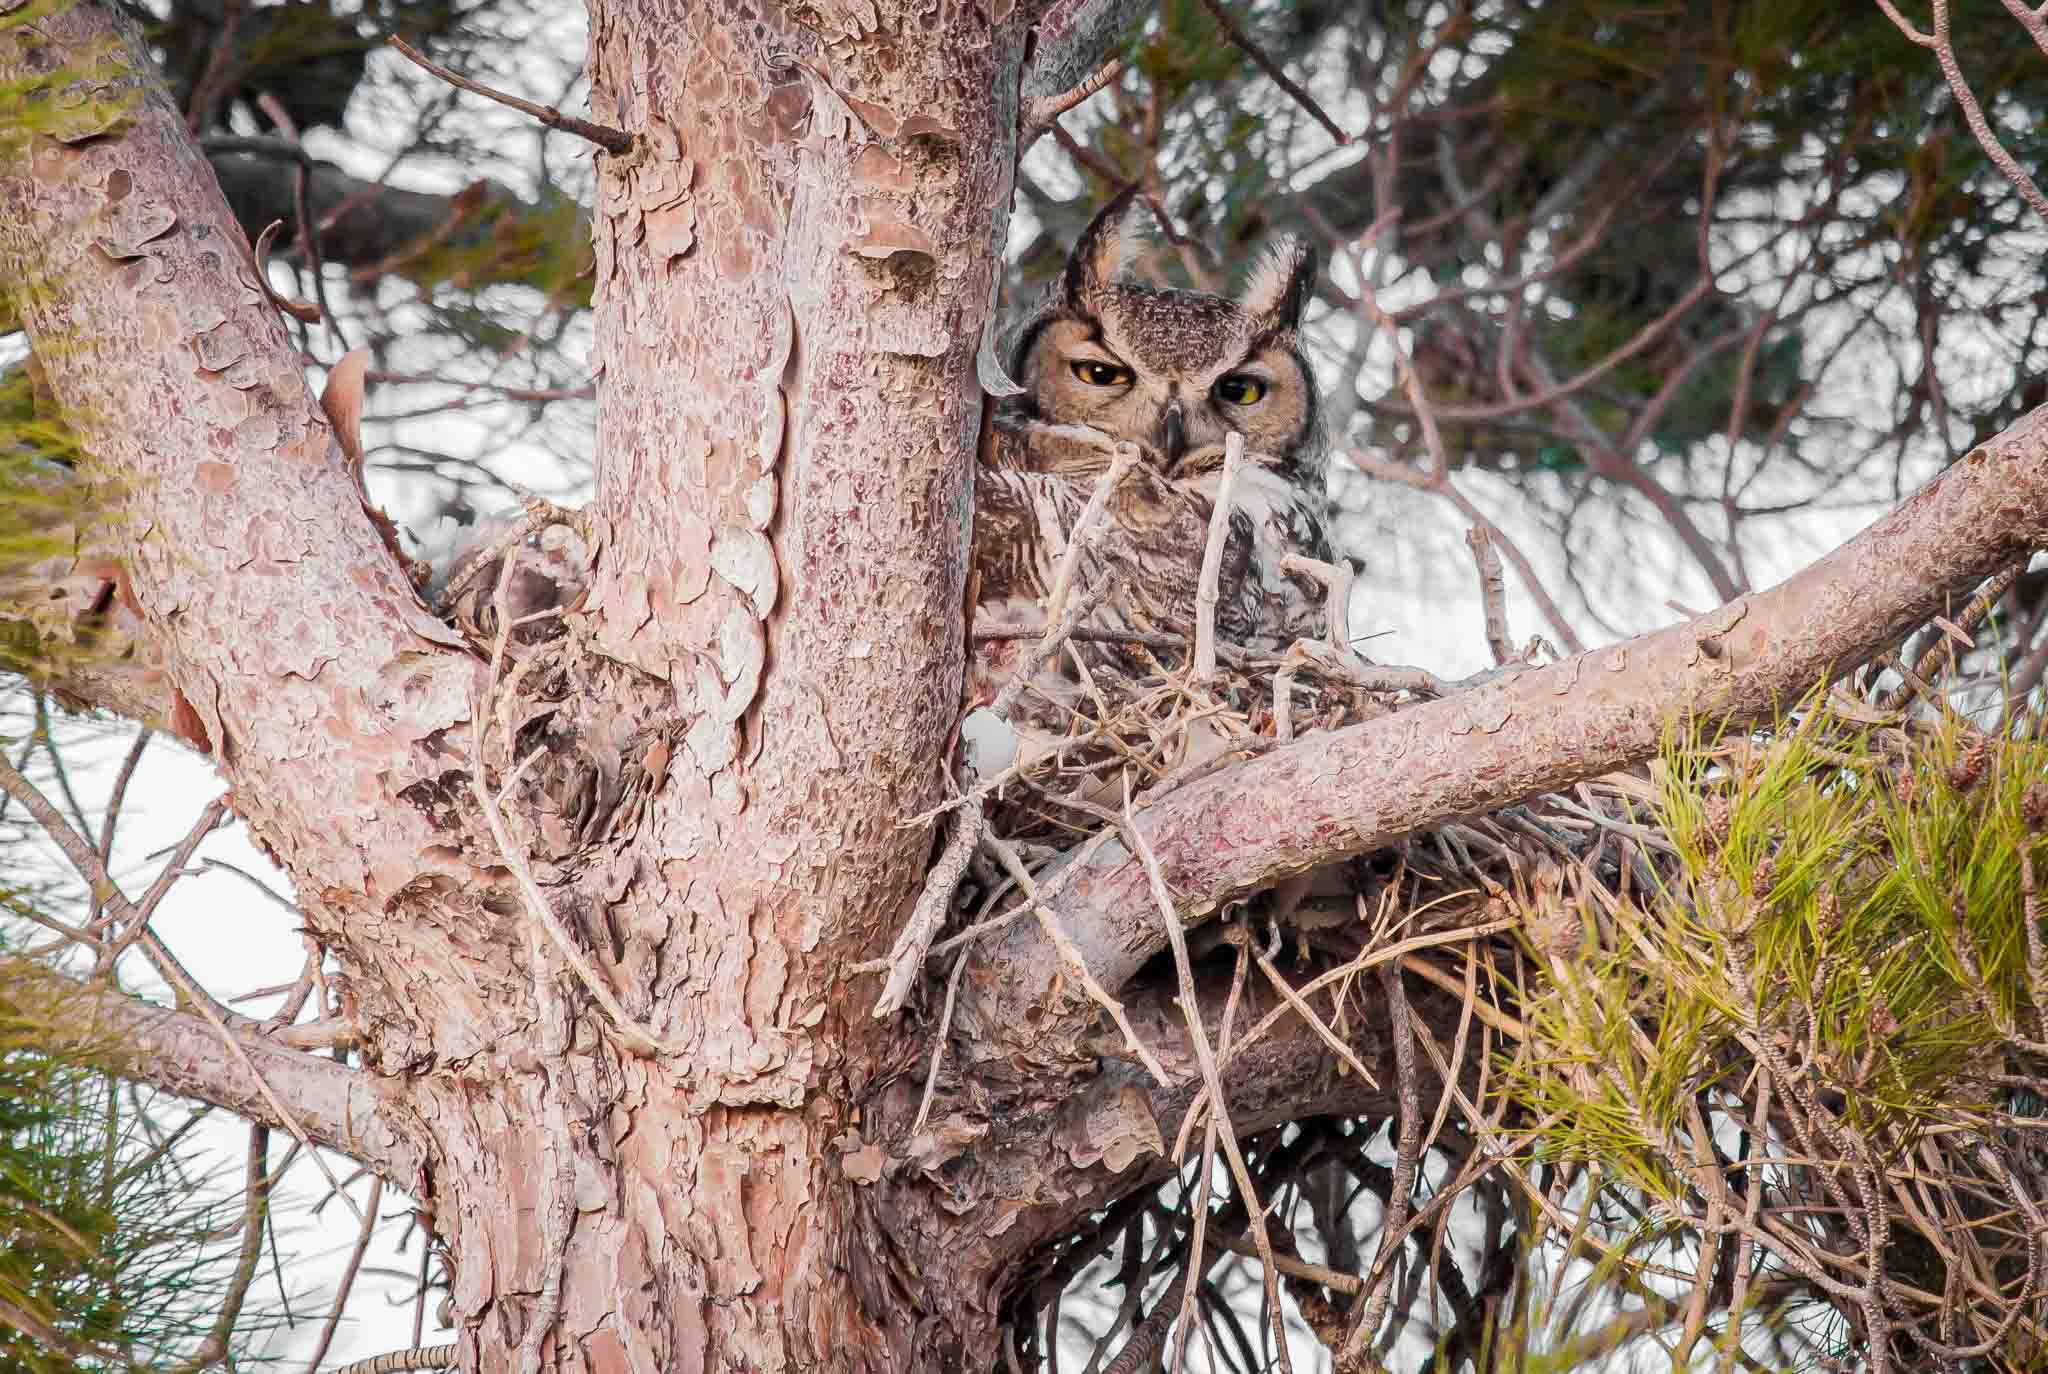 New Mother - Great Horned Owl